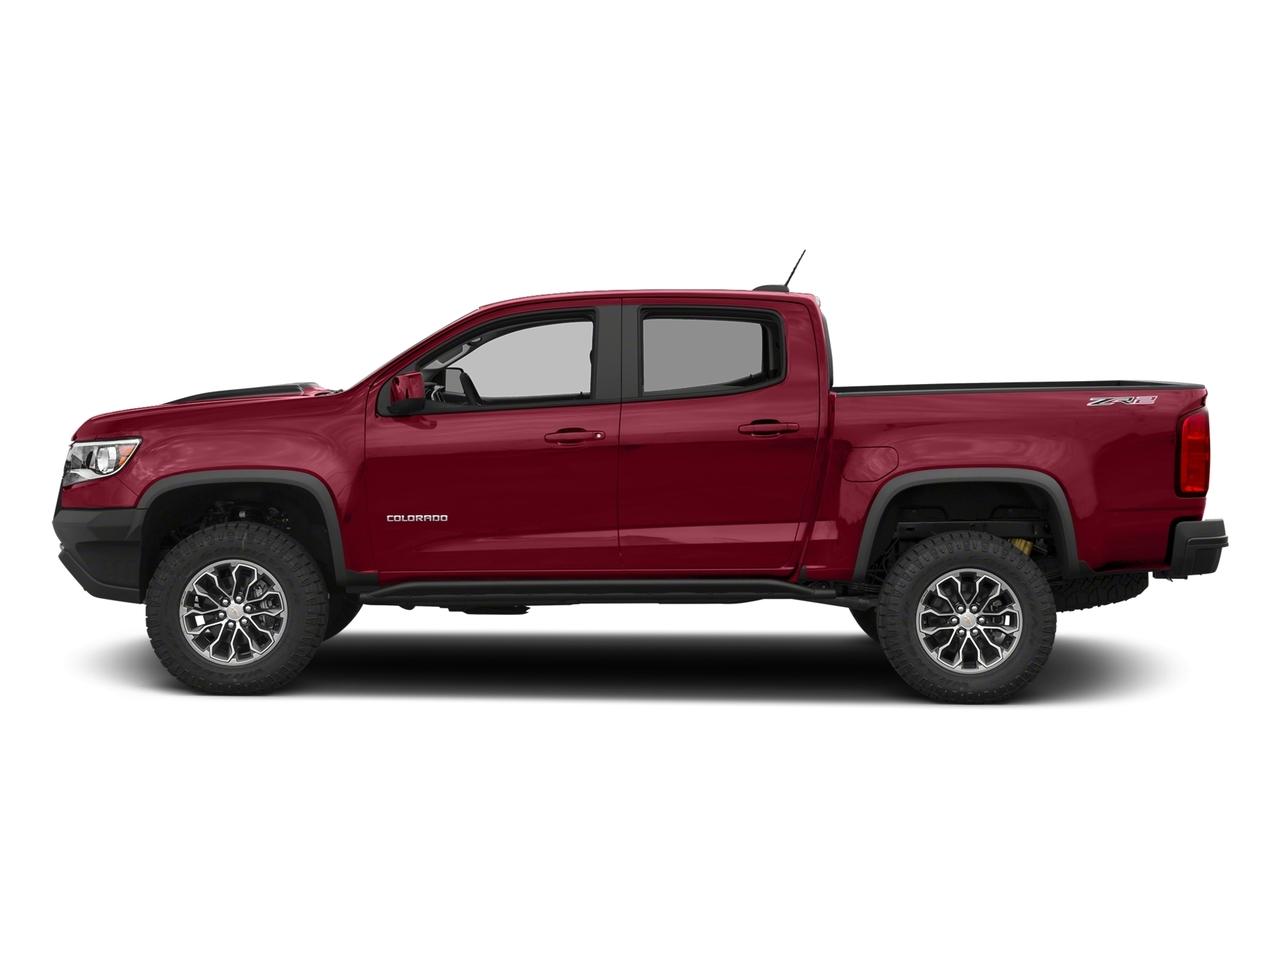 Used 2017 Chevrolet Colorado ZR2 with VIN 1GCGTEEN9H1318079 for sale in Saint Cloud, Minnesota